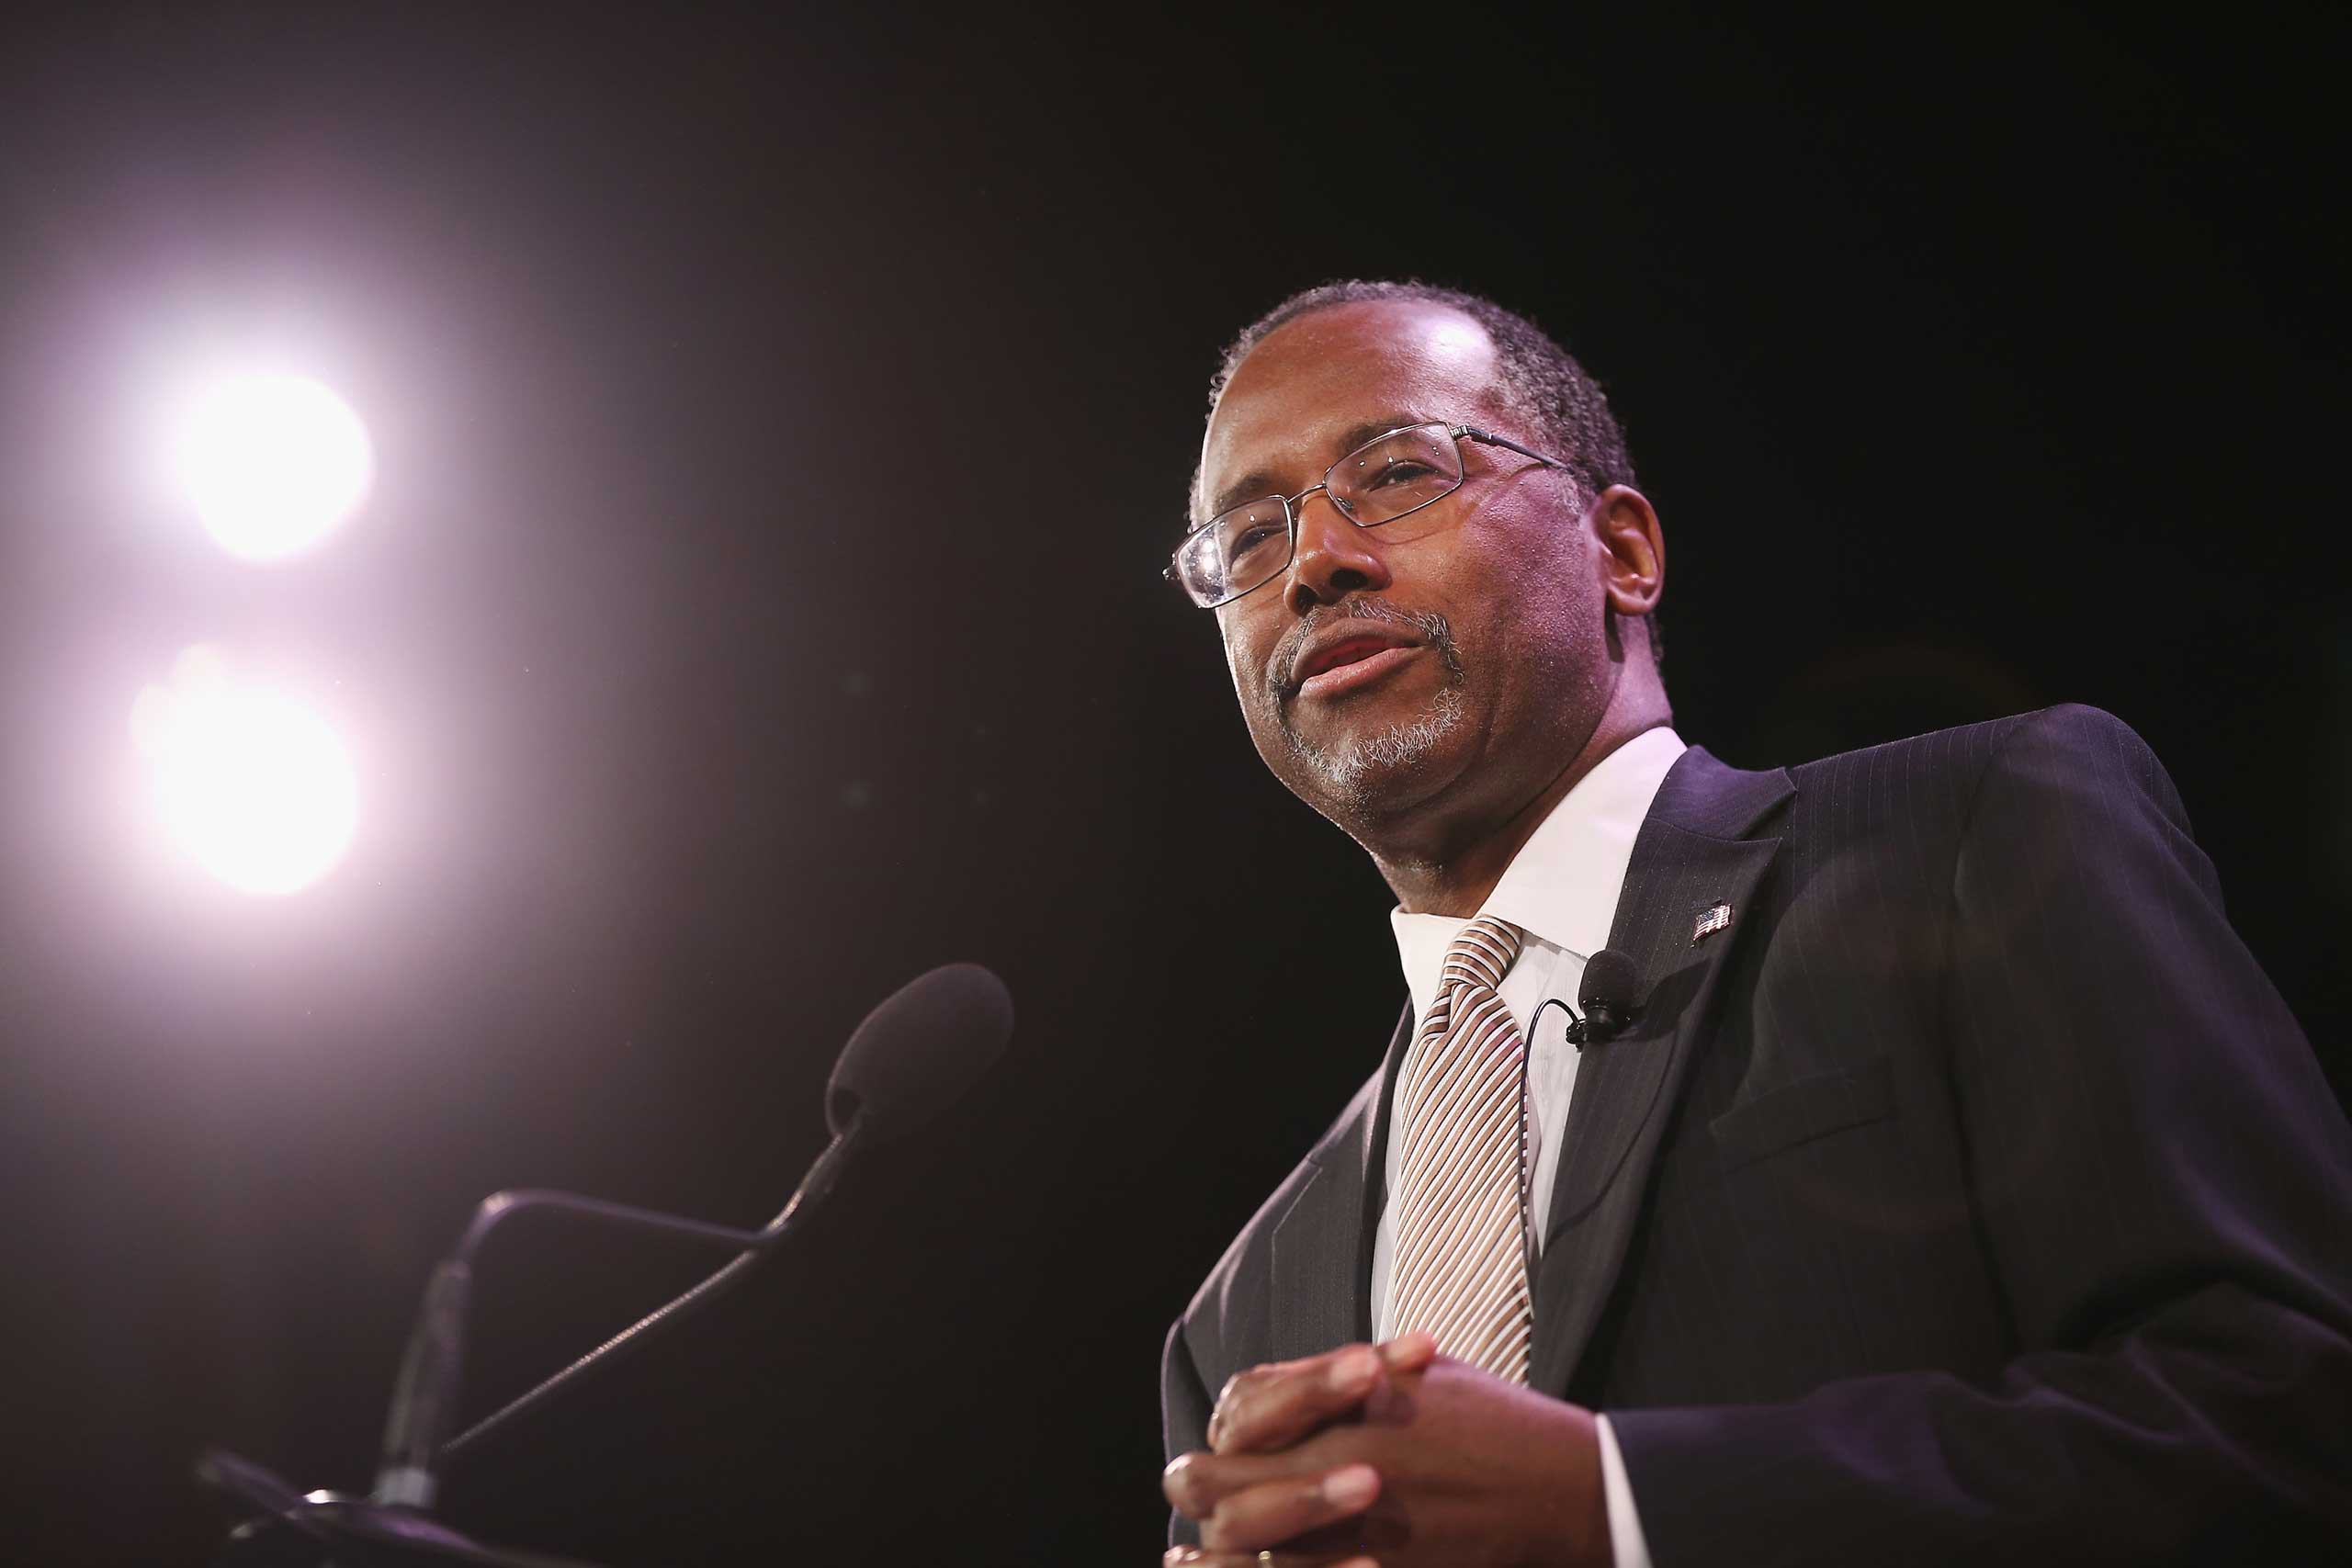 Dr. Ben Carson speaks to guests at the Iowa Freedom Summit on Jan. 24, 2015 in Des Moines, Iowa. (Scott Olson—Getty Images)